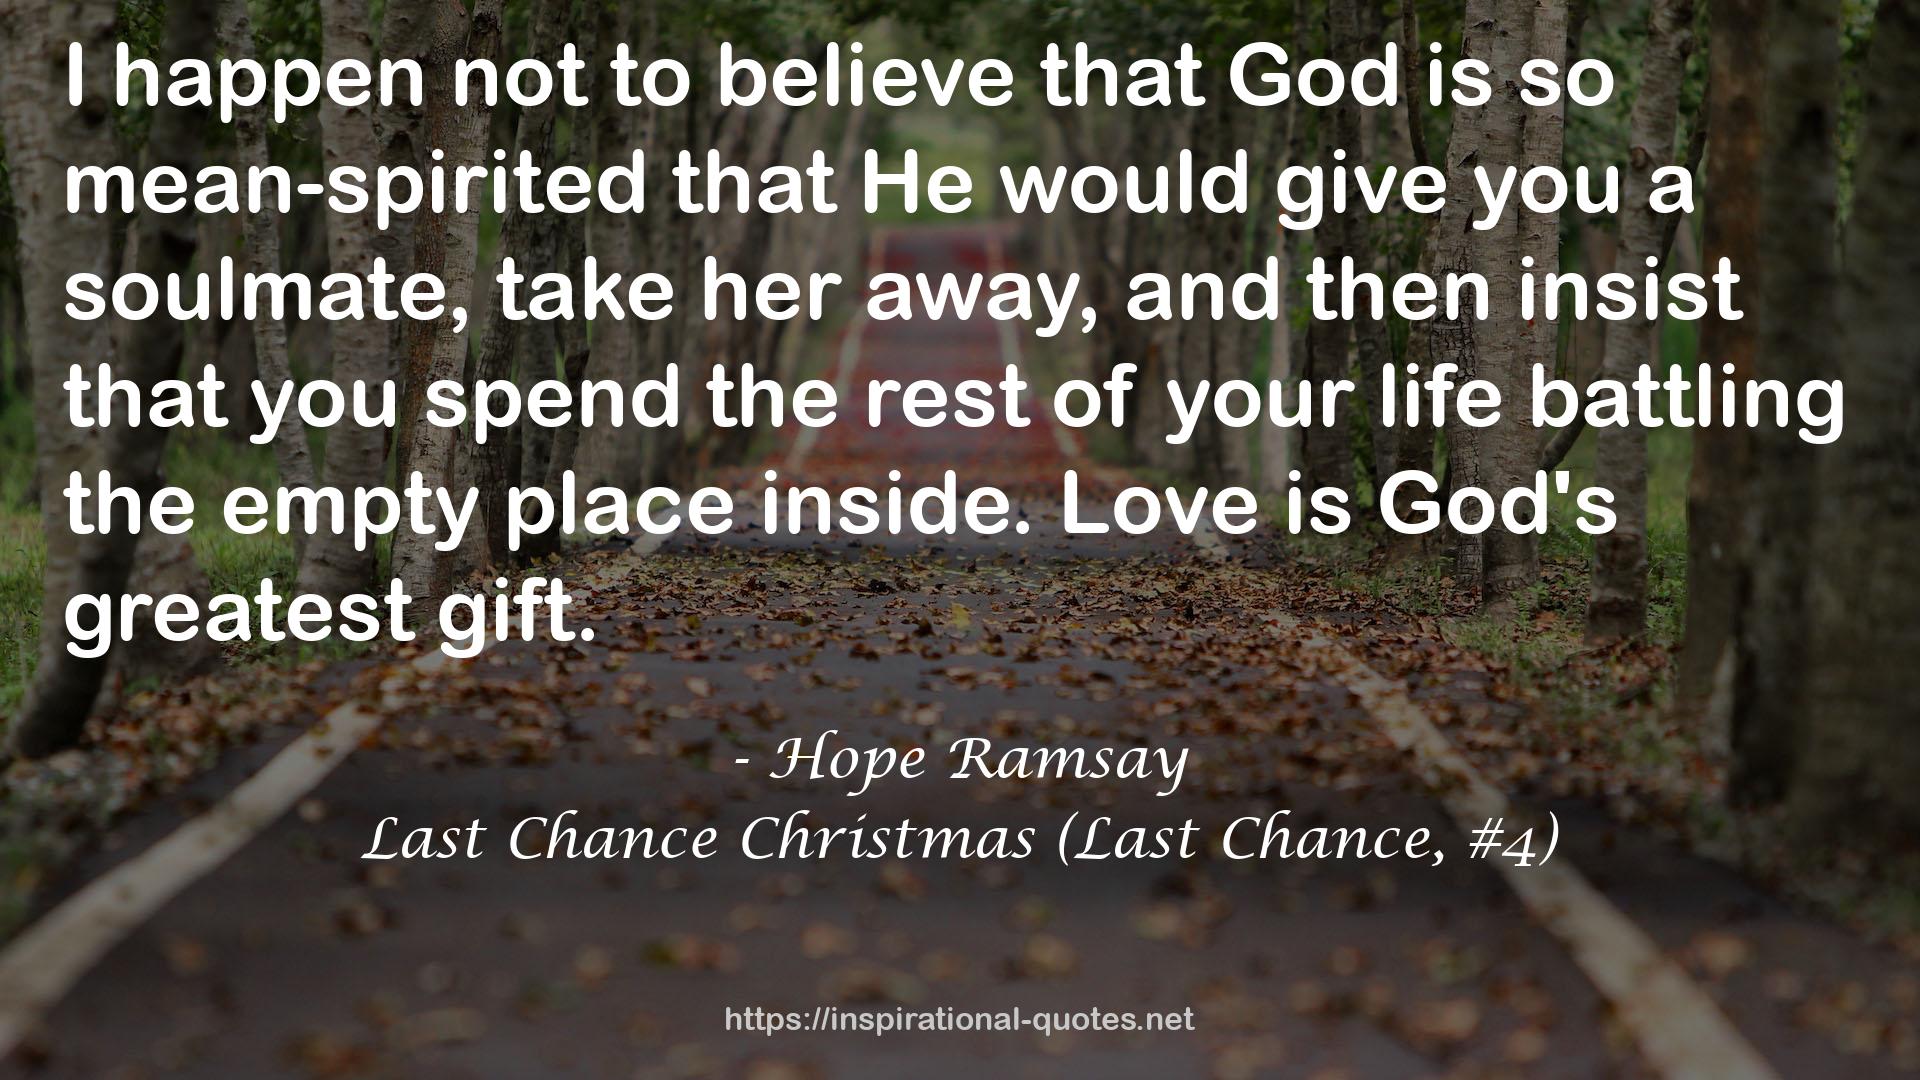 Last Chance Christmas (Last Chance, #4) QUOTES